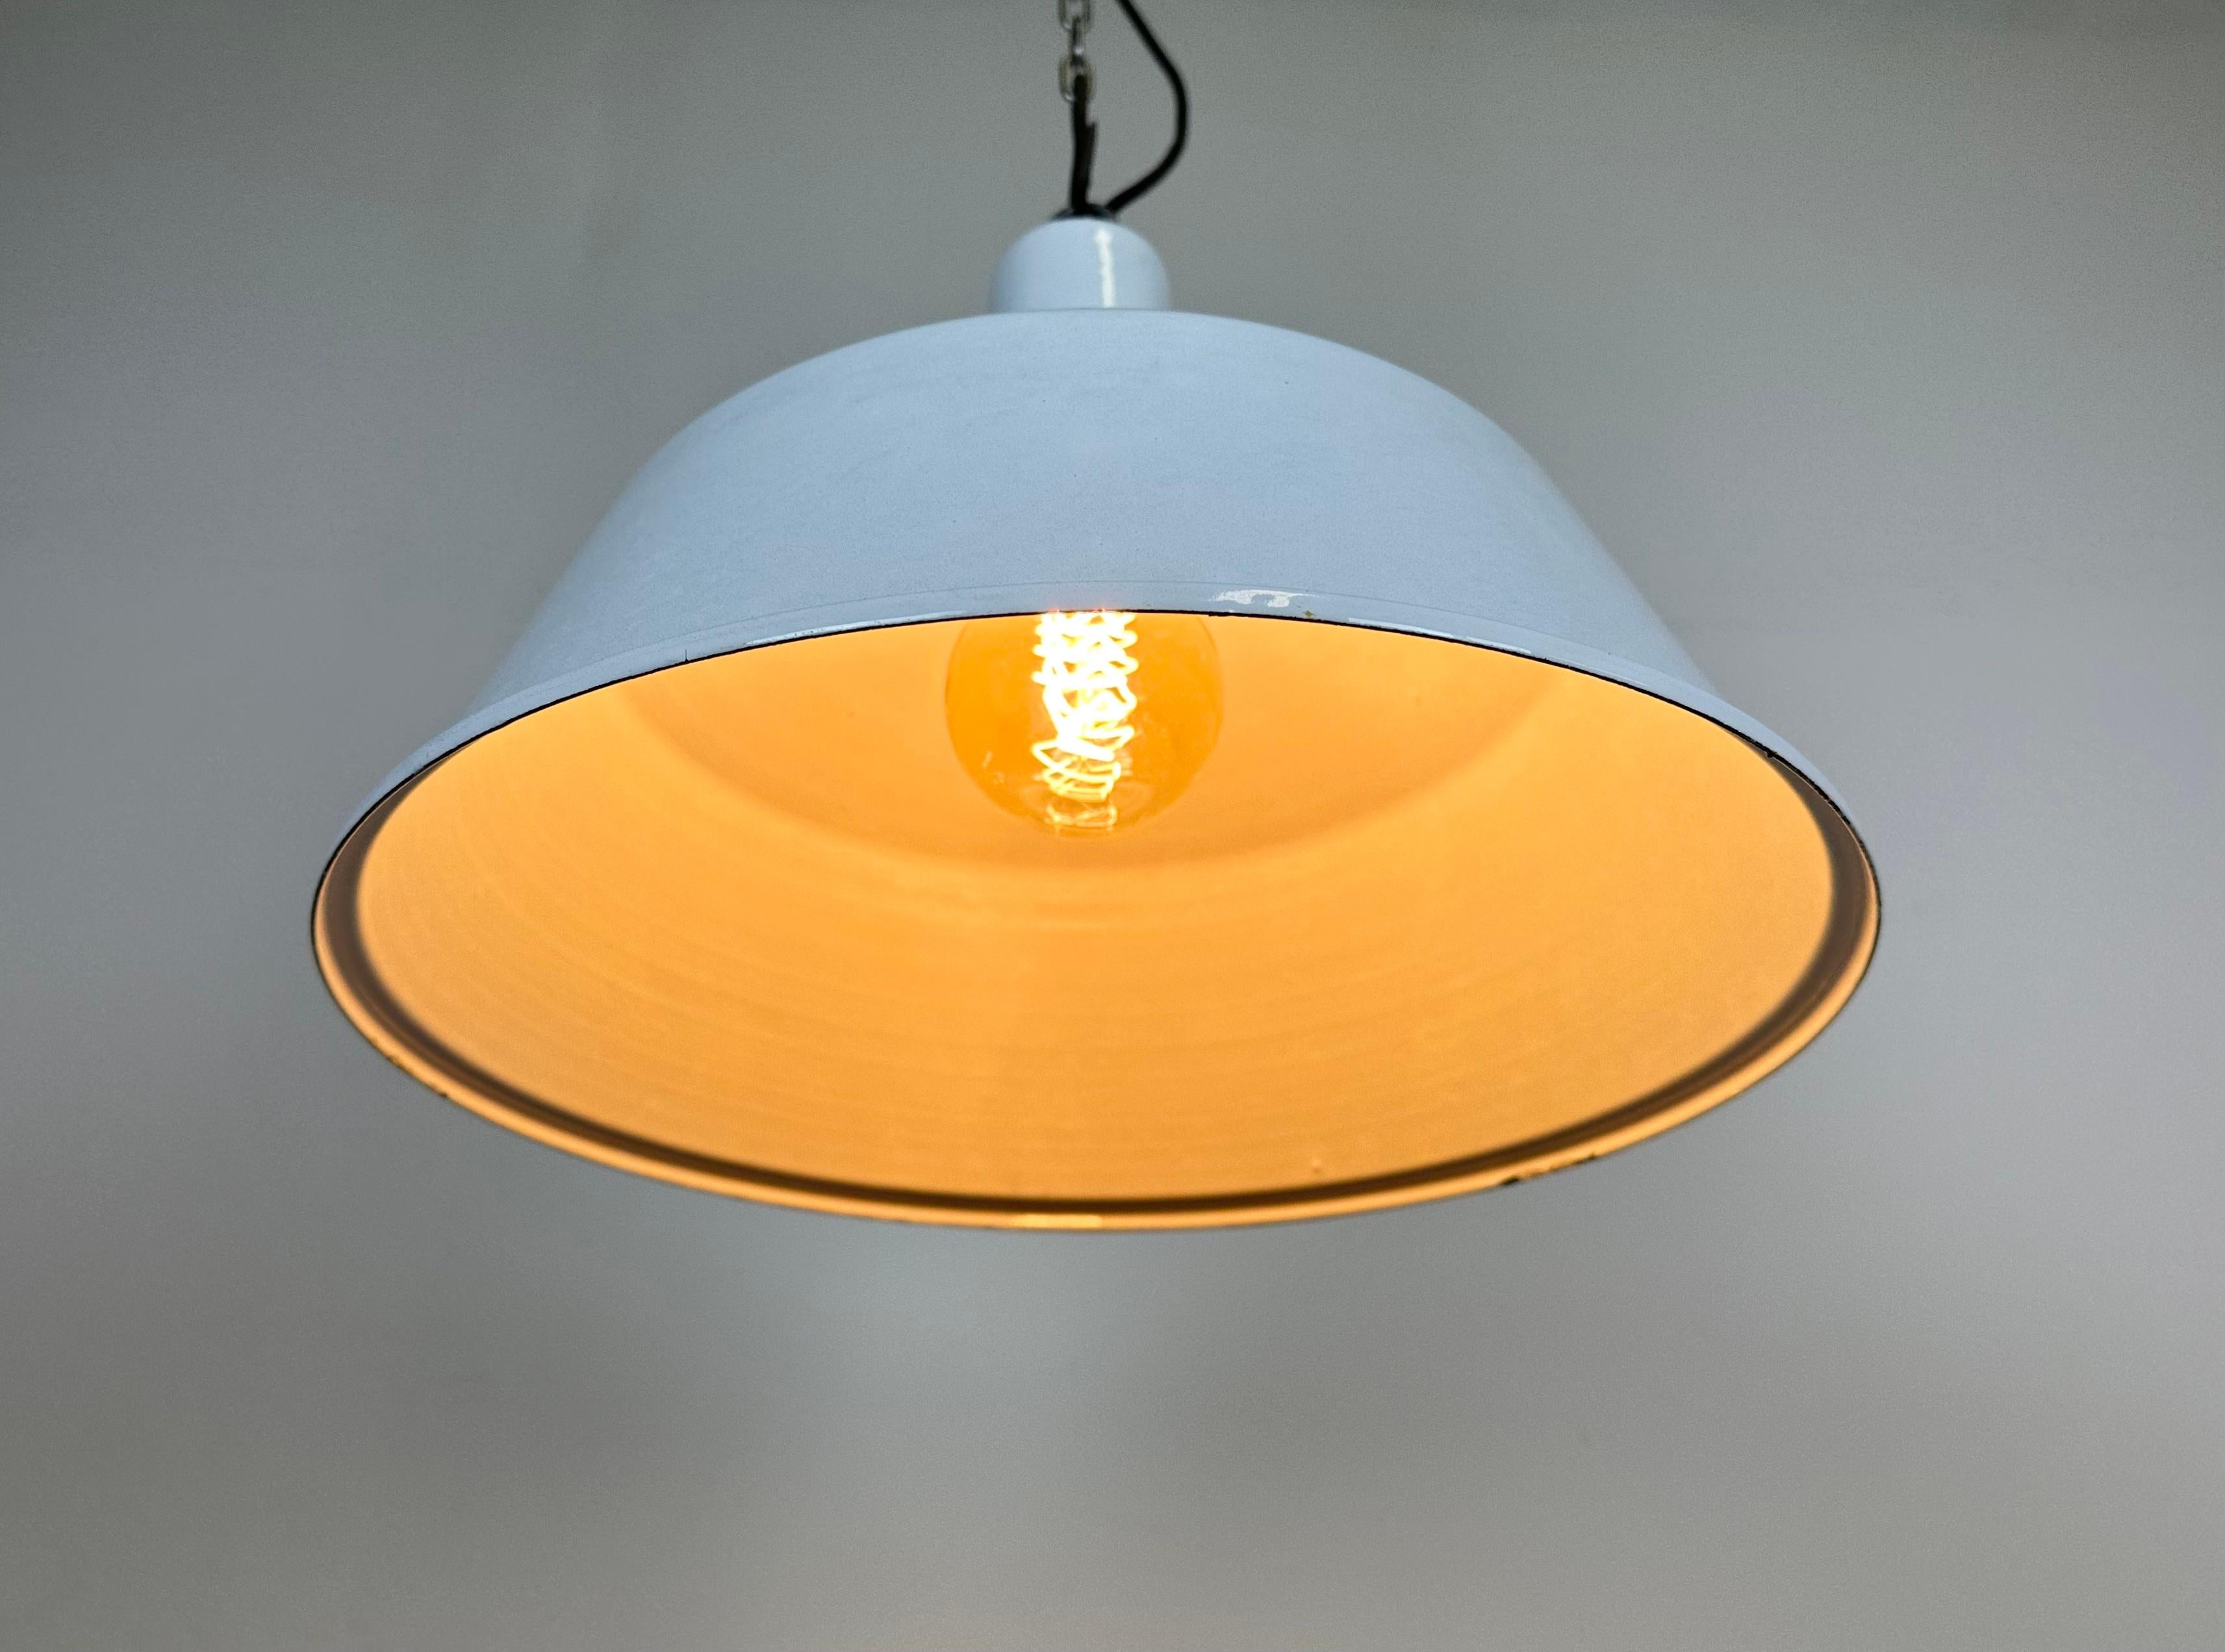 Industrial White Enamel Pendant Lamp from Emax, 1960s For Sale 4